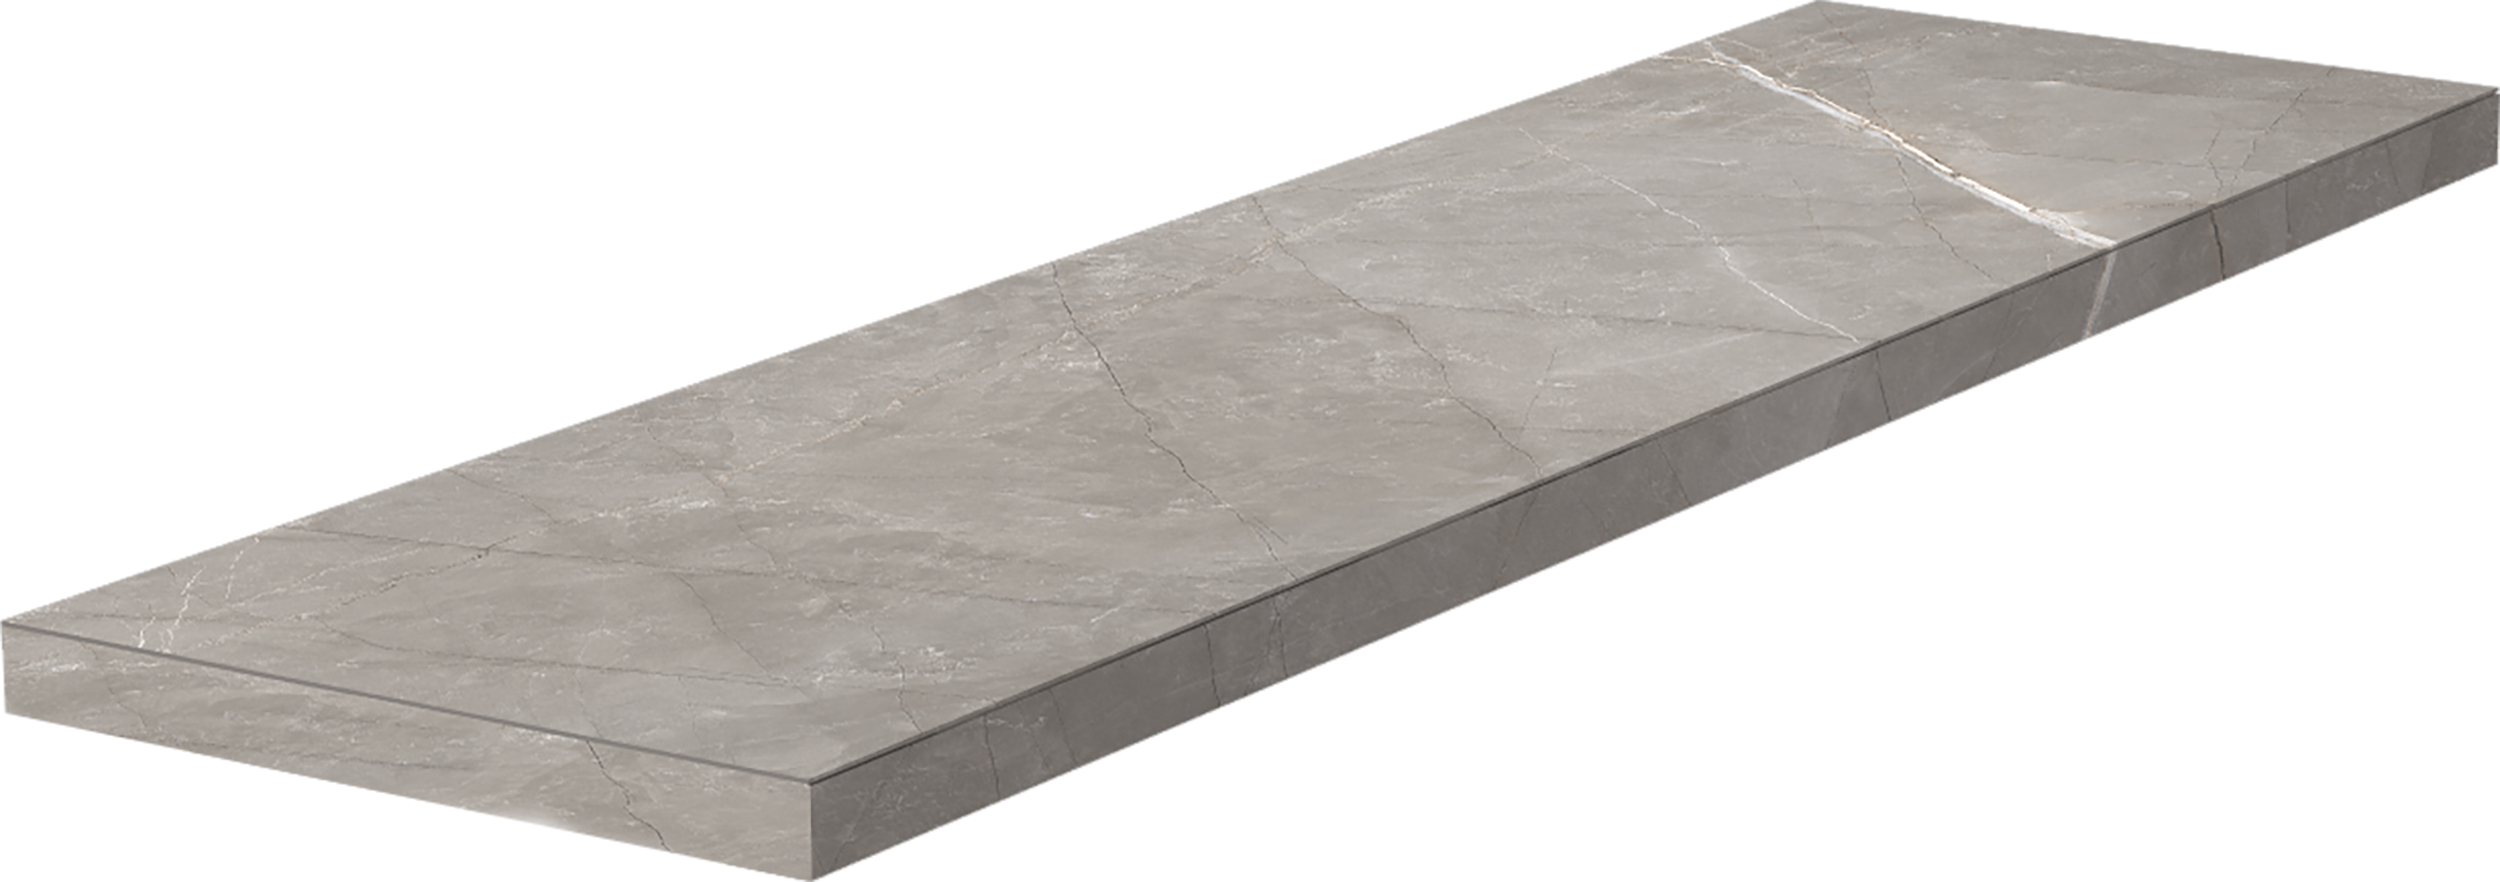 Del Conca Boutique Amani Hbo5 Naturale Corner plate Step Right G3BO05RGD 33x120cm rectified 8,5mm